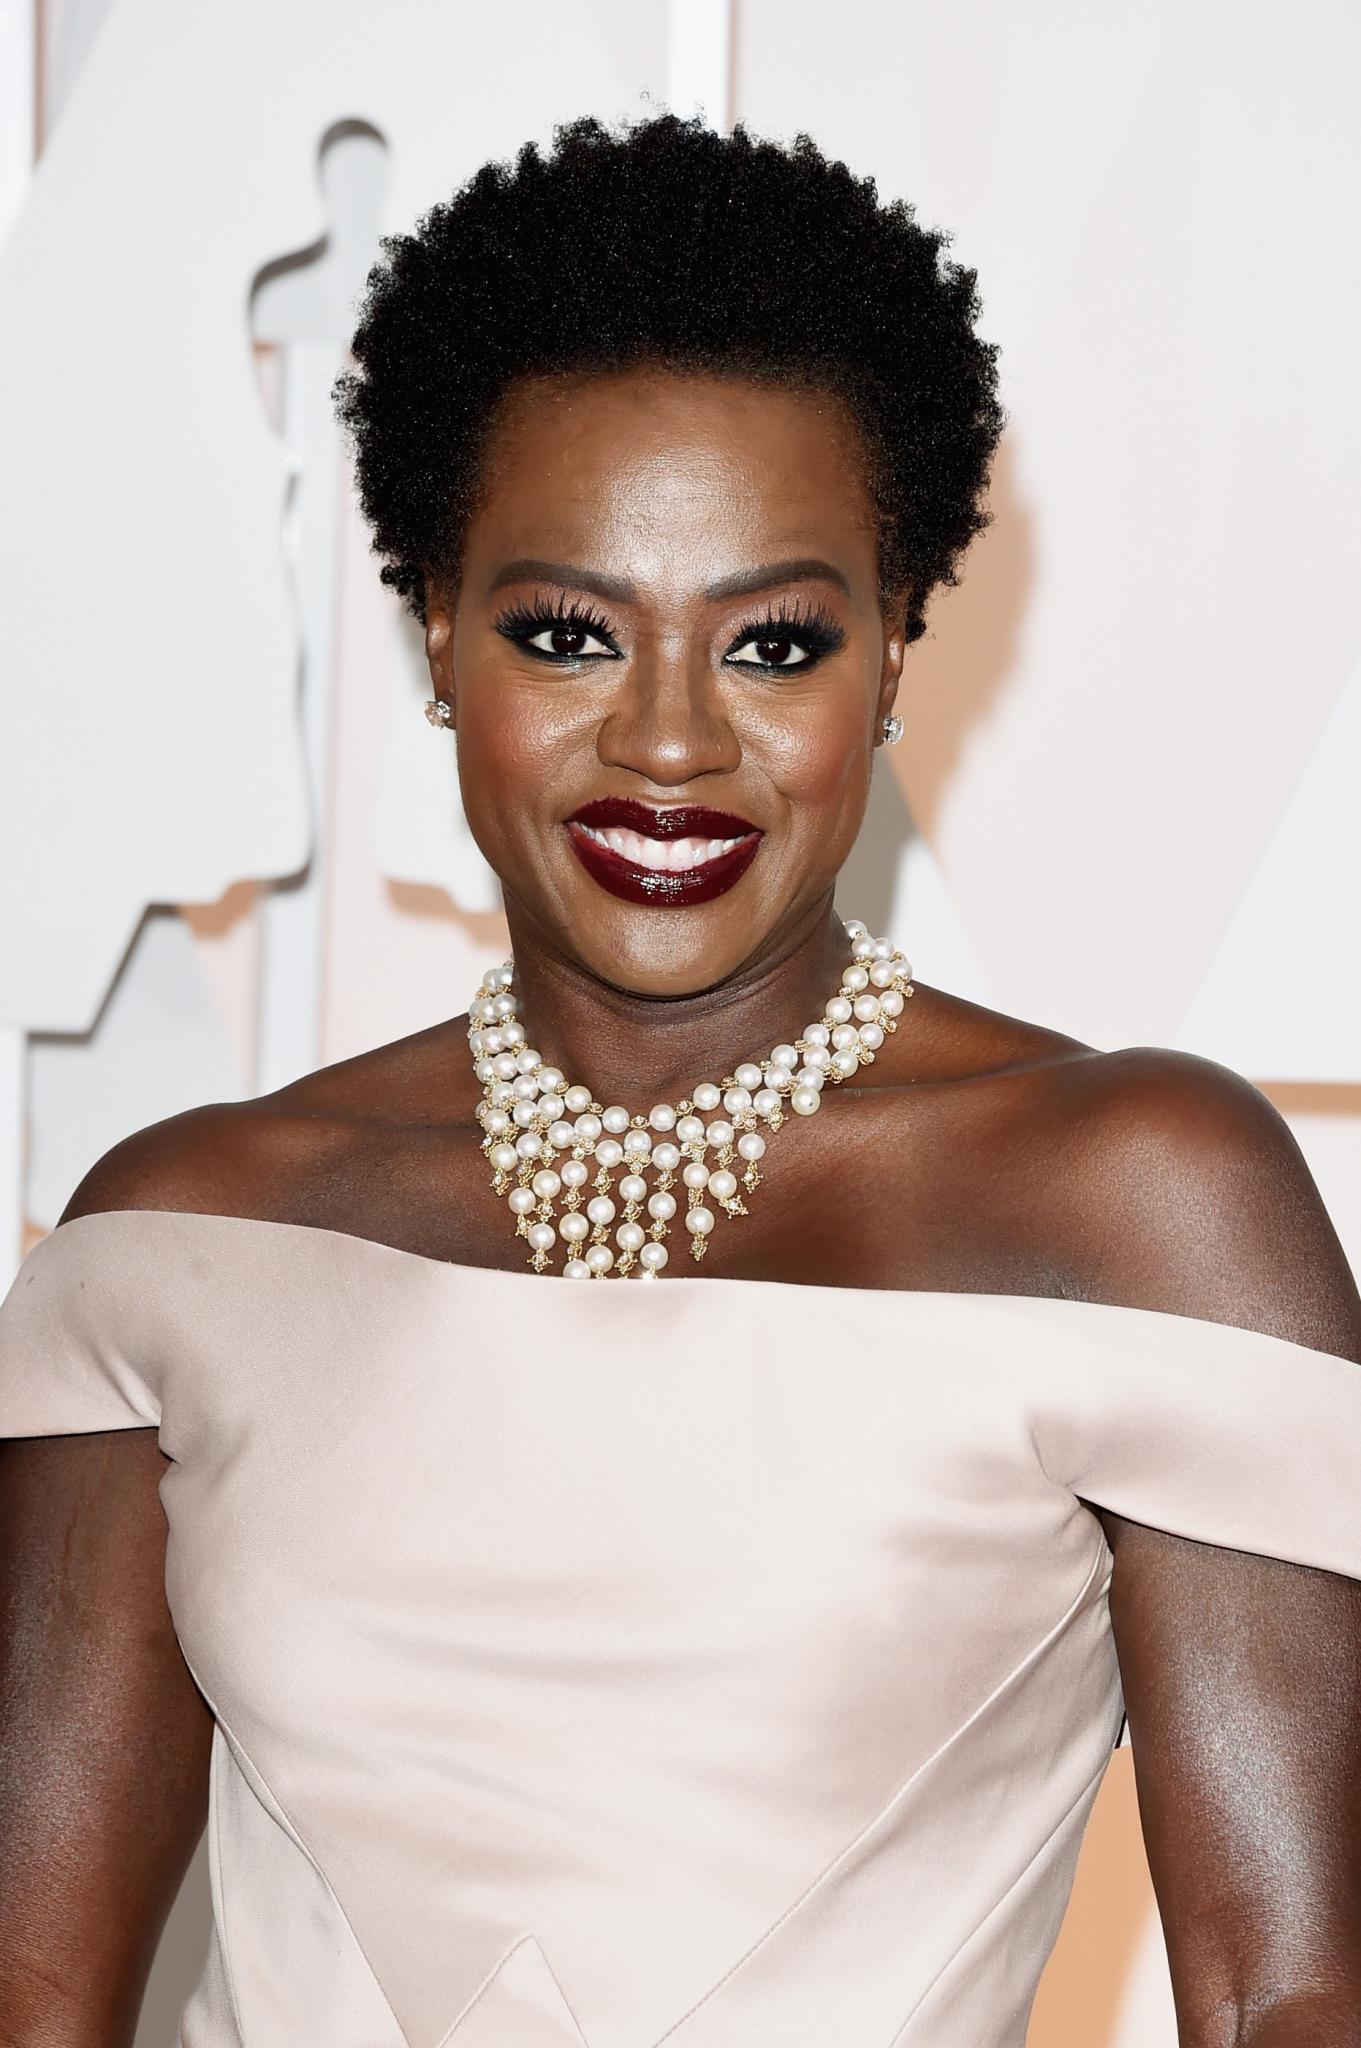 Top Hairstyles From the 2015 Academy Awards